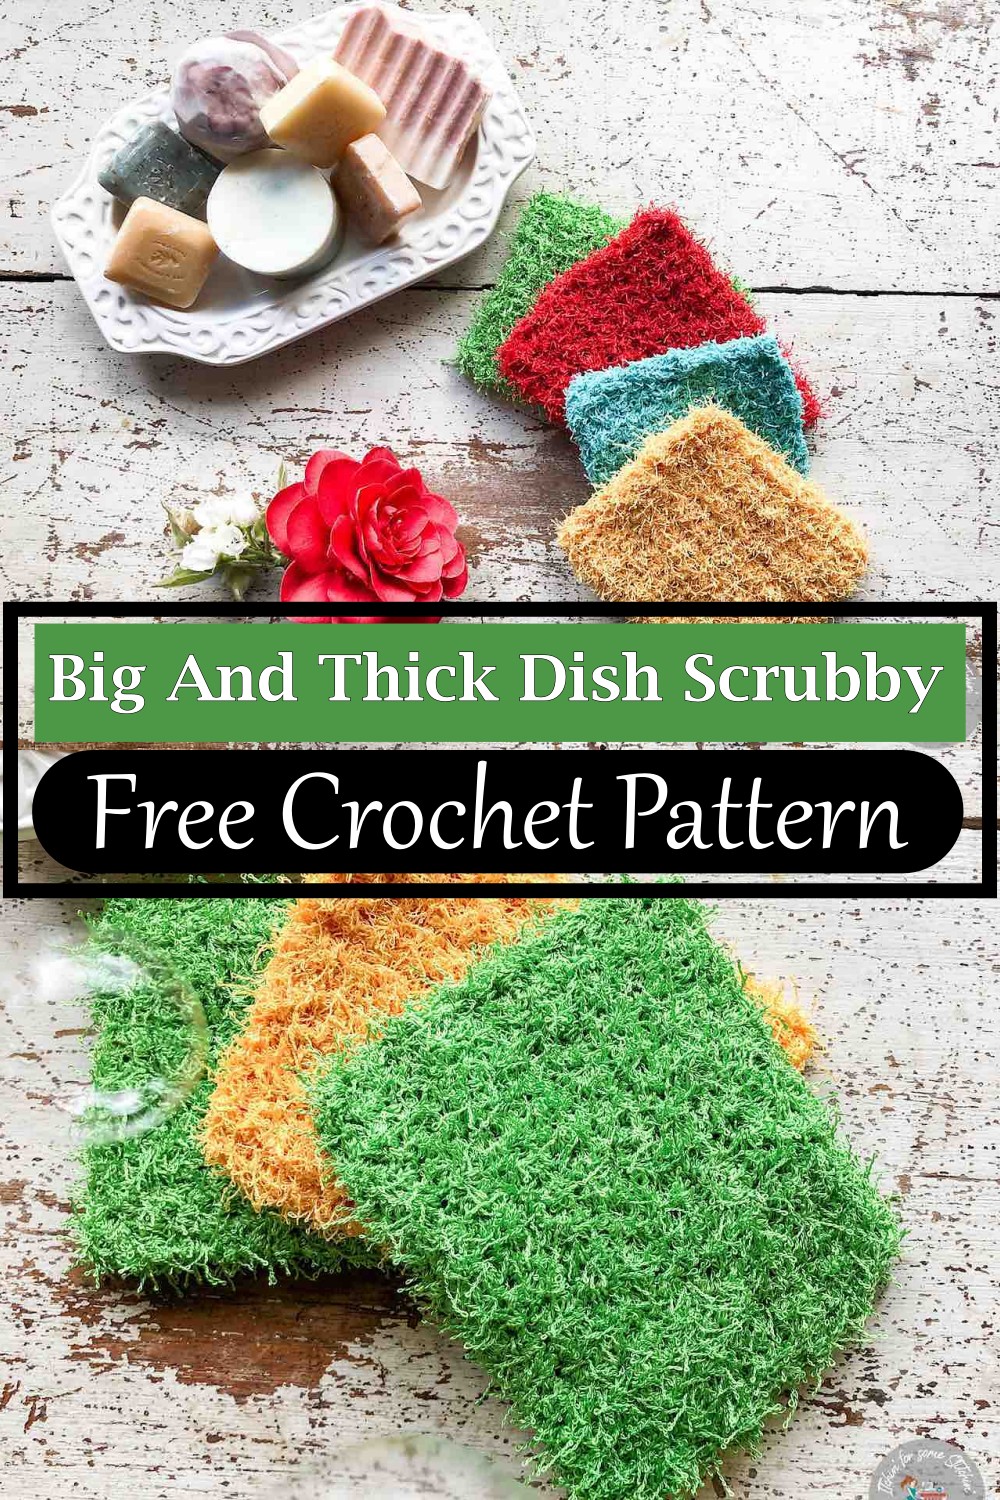 Big And Thick Dish Scrubby